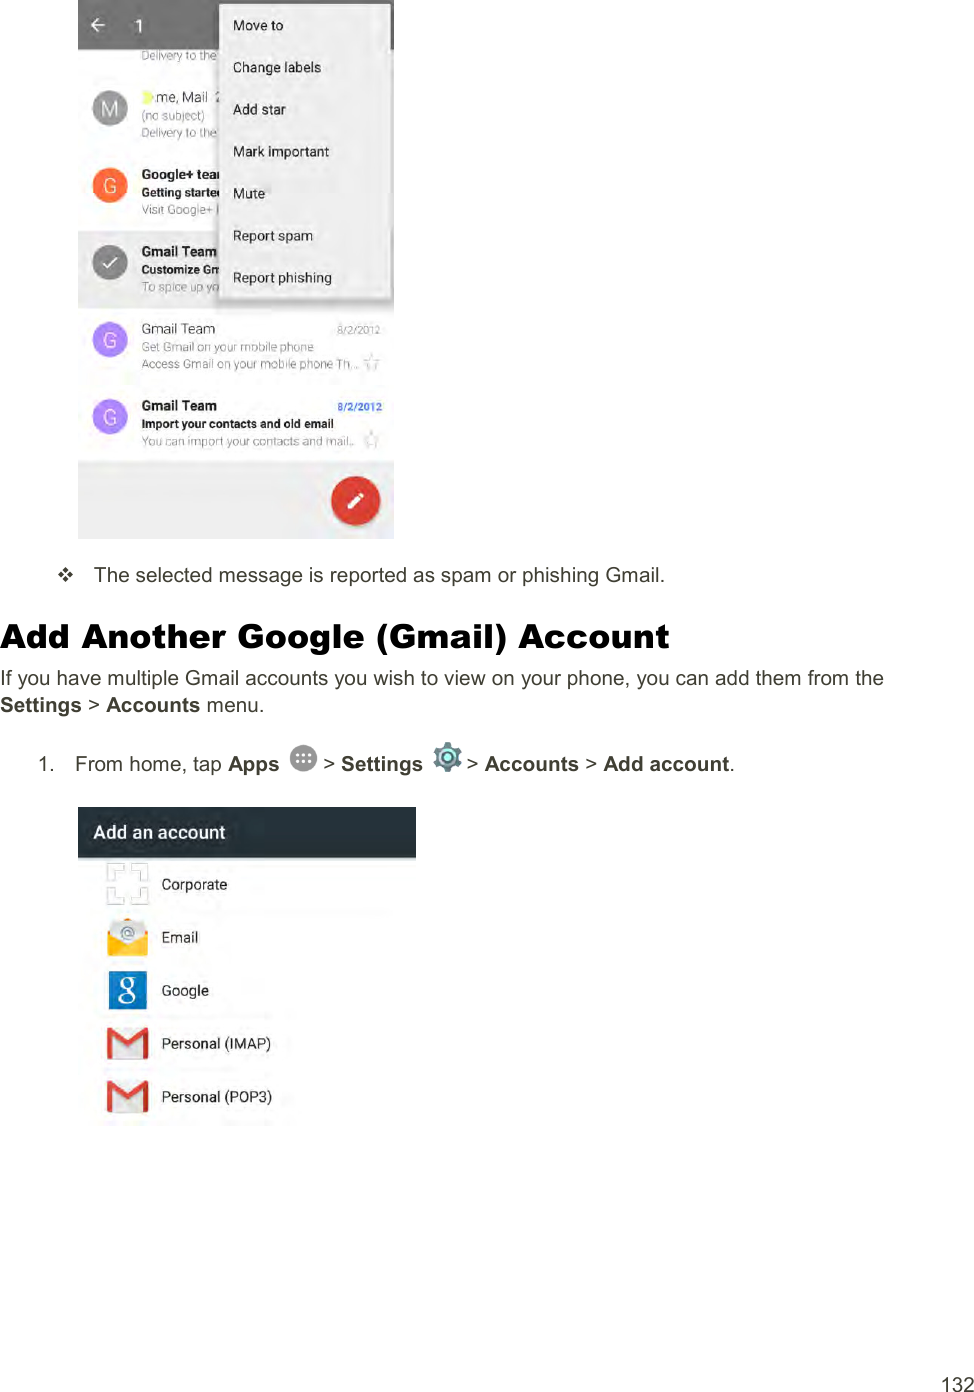  132     The selected message is reported as spam or phishing Gmail. Add Another Google (Gmail) Account If you have multiple Gmail accounts you wish to view on your phone, you can add them from the Settings &gt; Accounts menu. 1.  From home, tap Apps   &gt; Settings   &gt; Accounts &gt; Add account.   